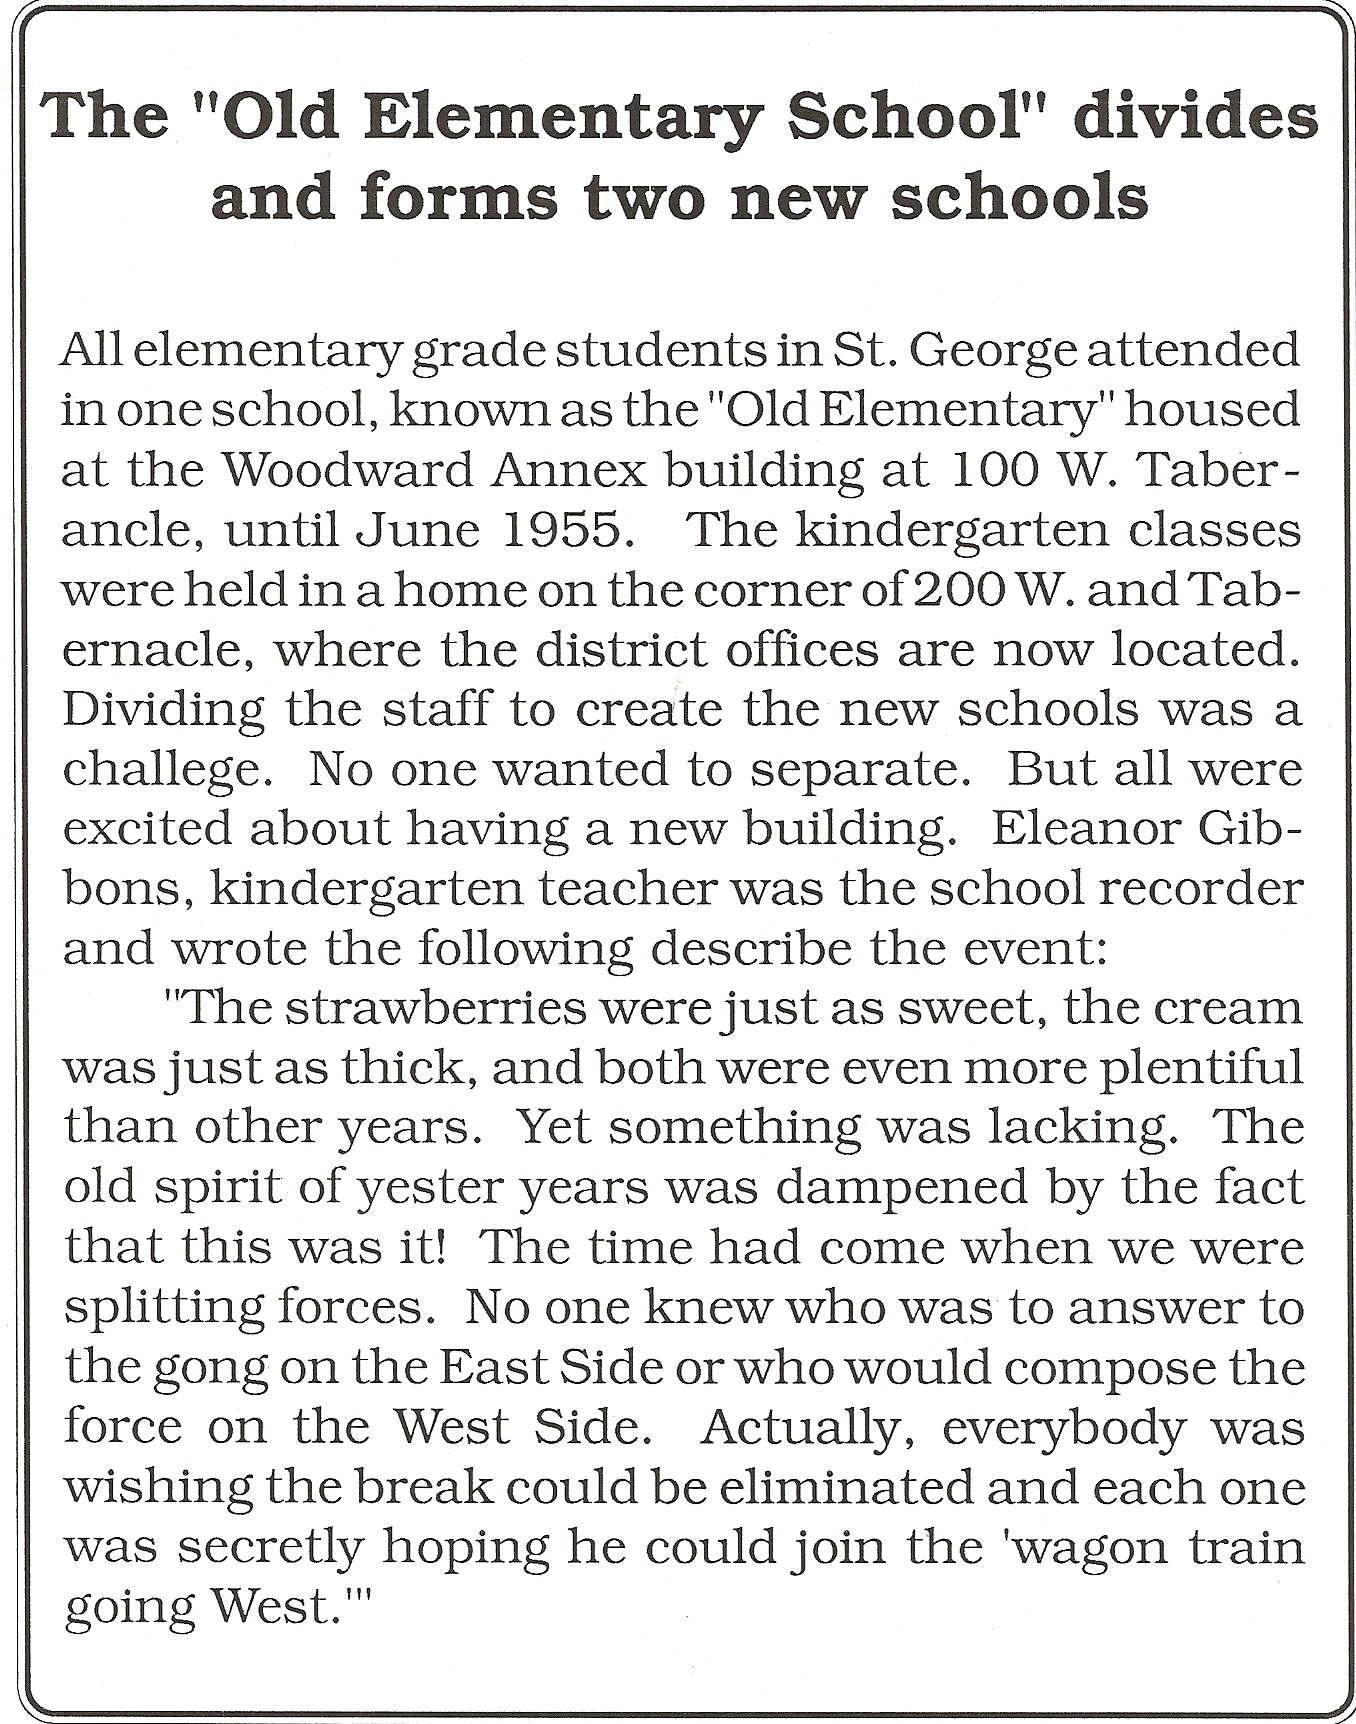 Page 1 of a brief history of West Elementary School